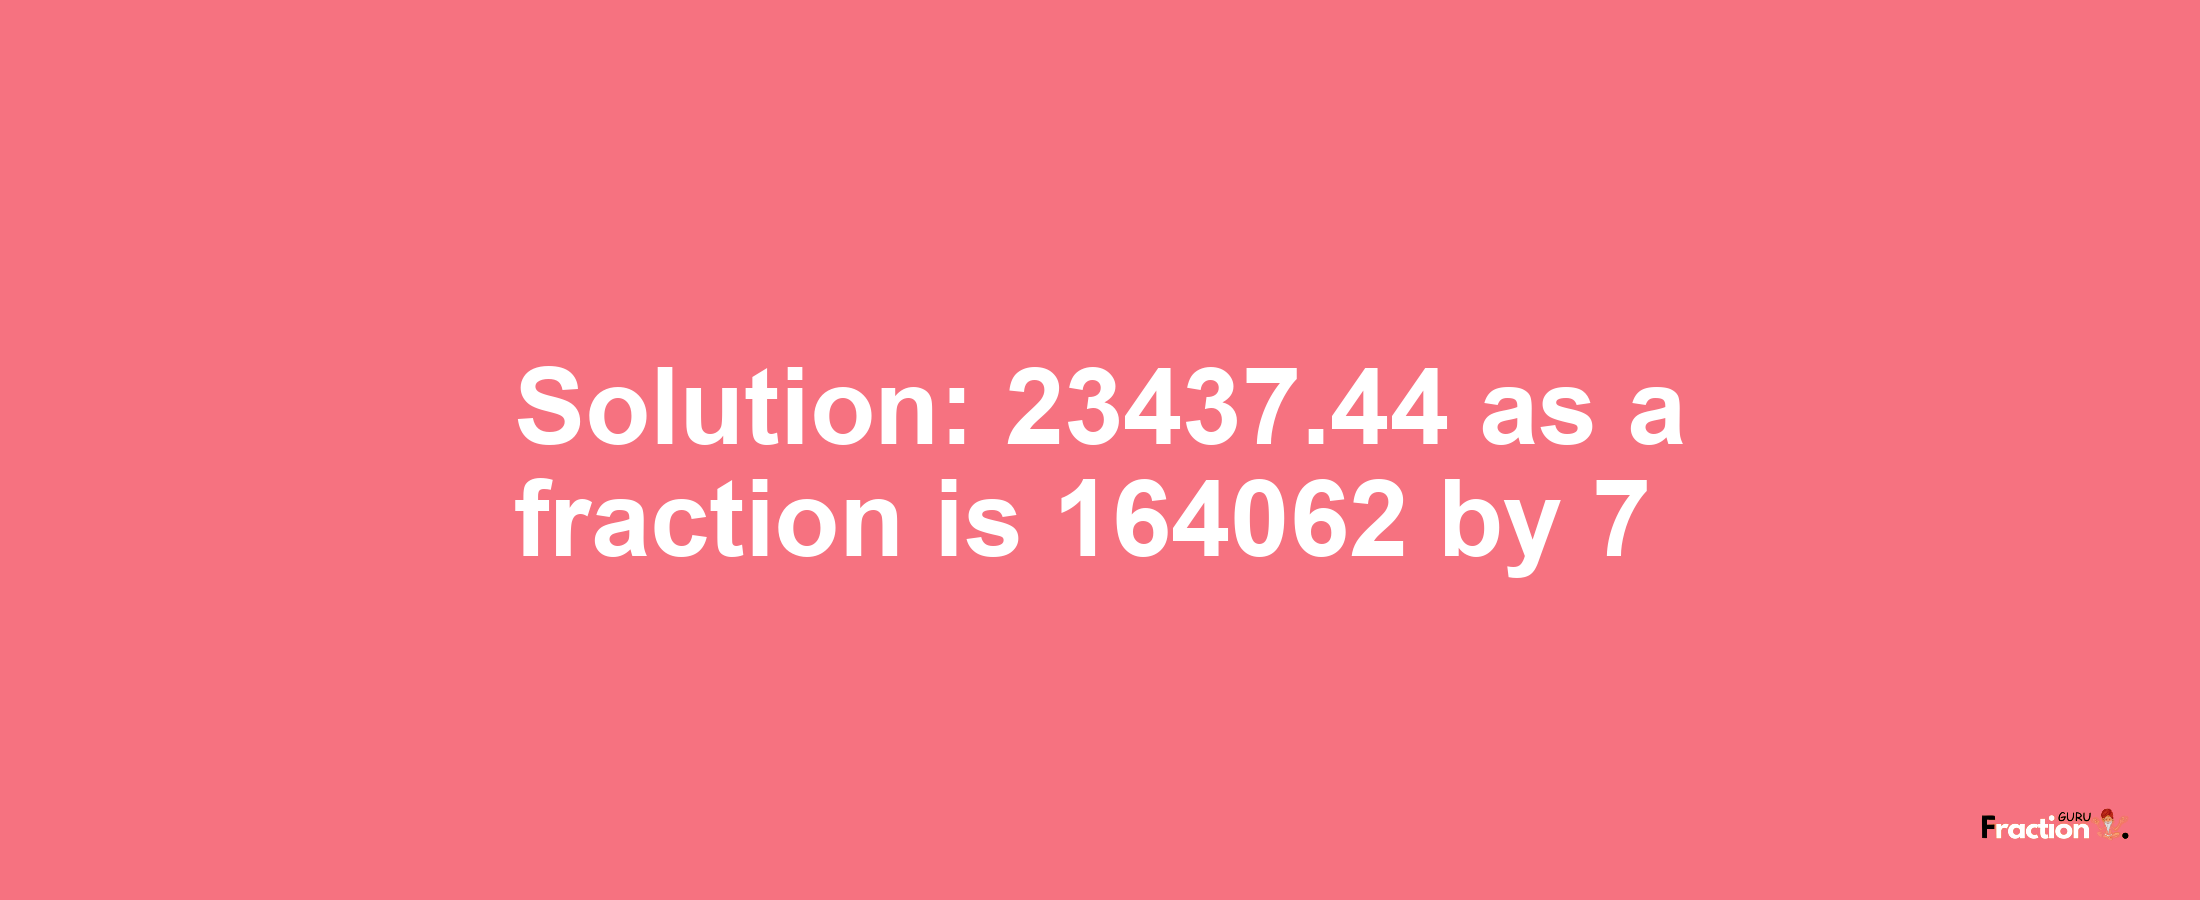 Solution:23437.44 as a fraction is 164062/7